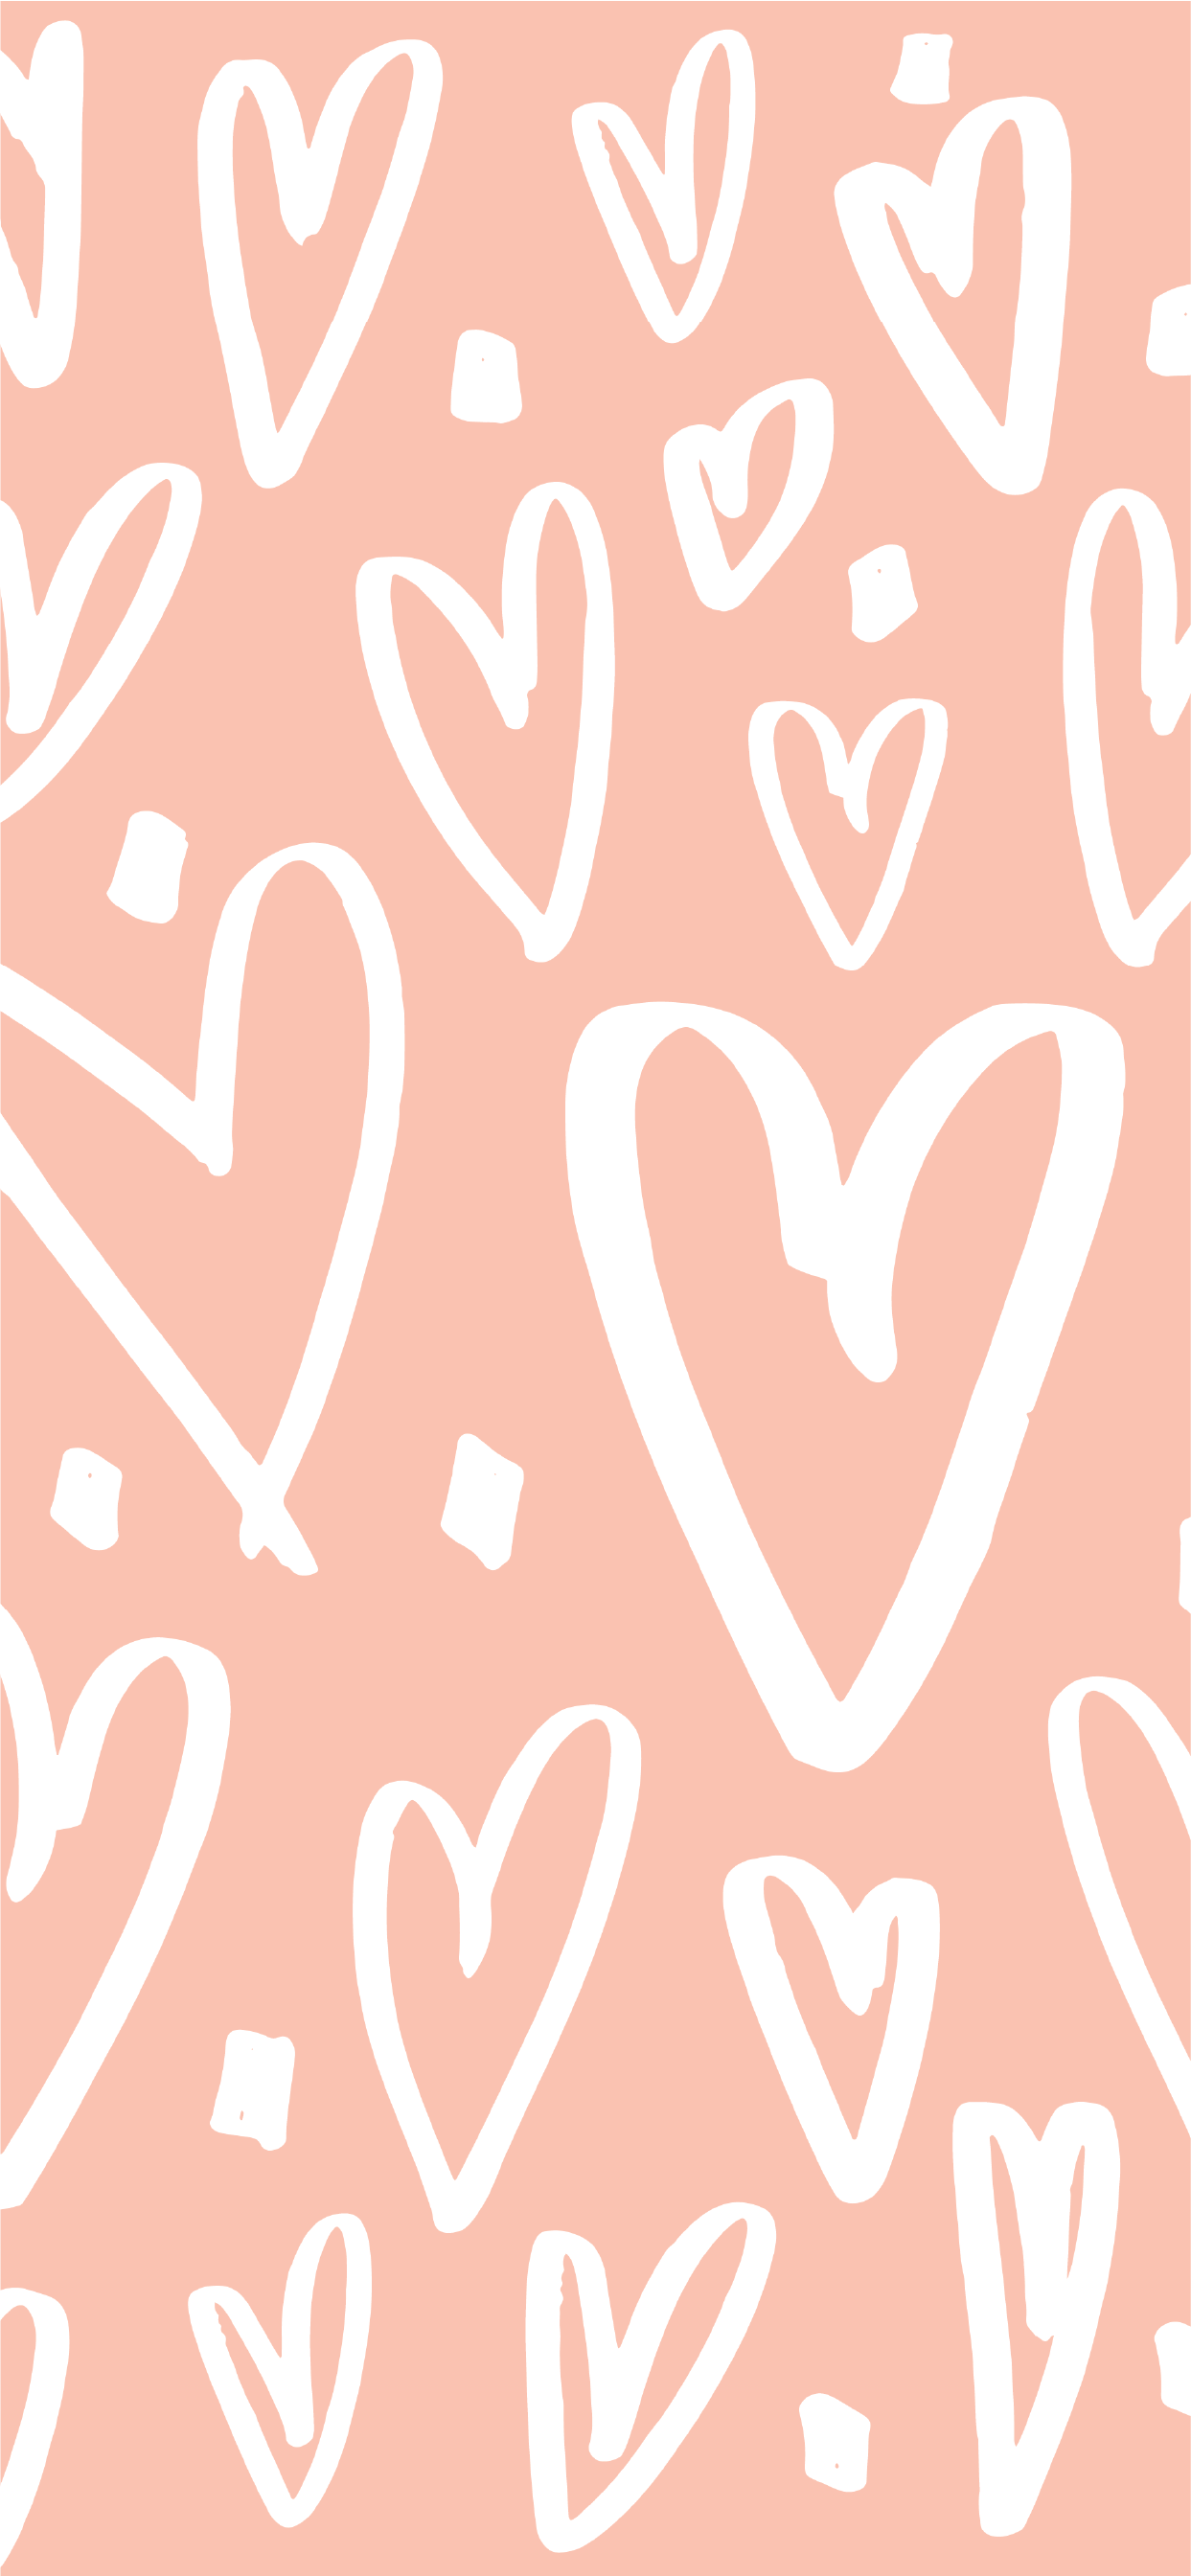 A pattern of white hearts on pink background - Valentine's Day